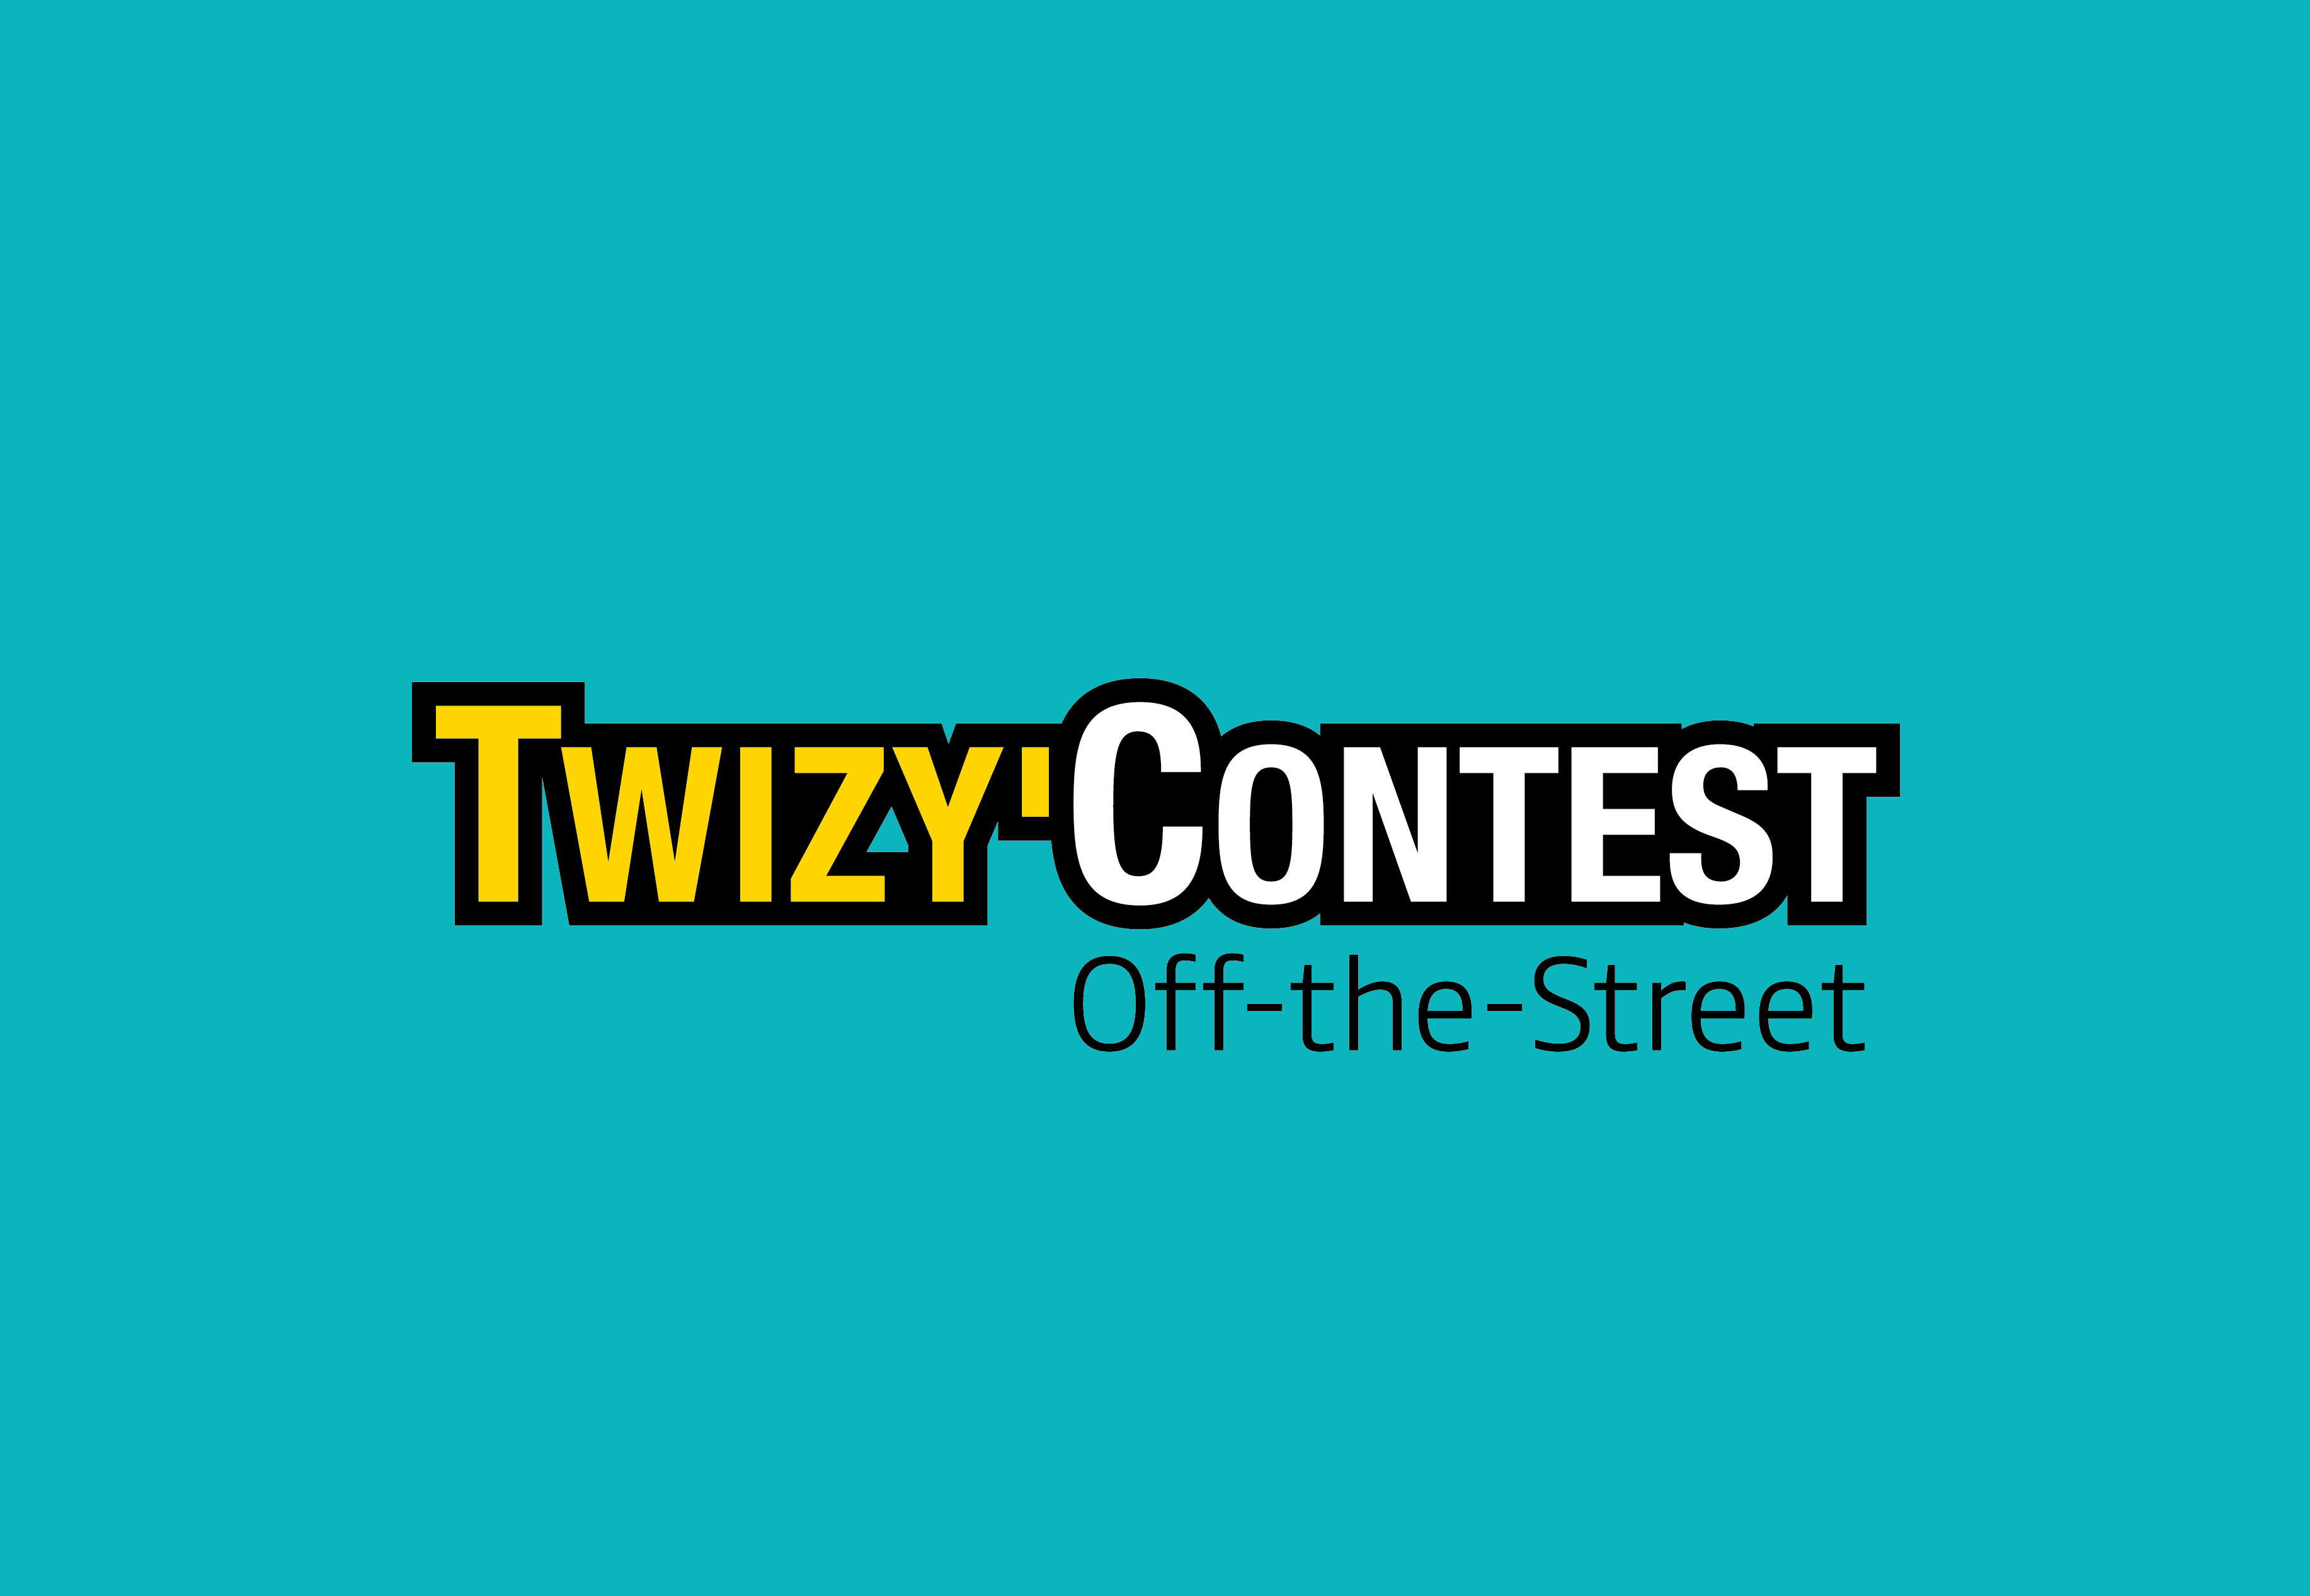 Signature Twizy Contest.png